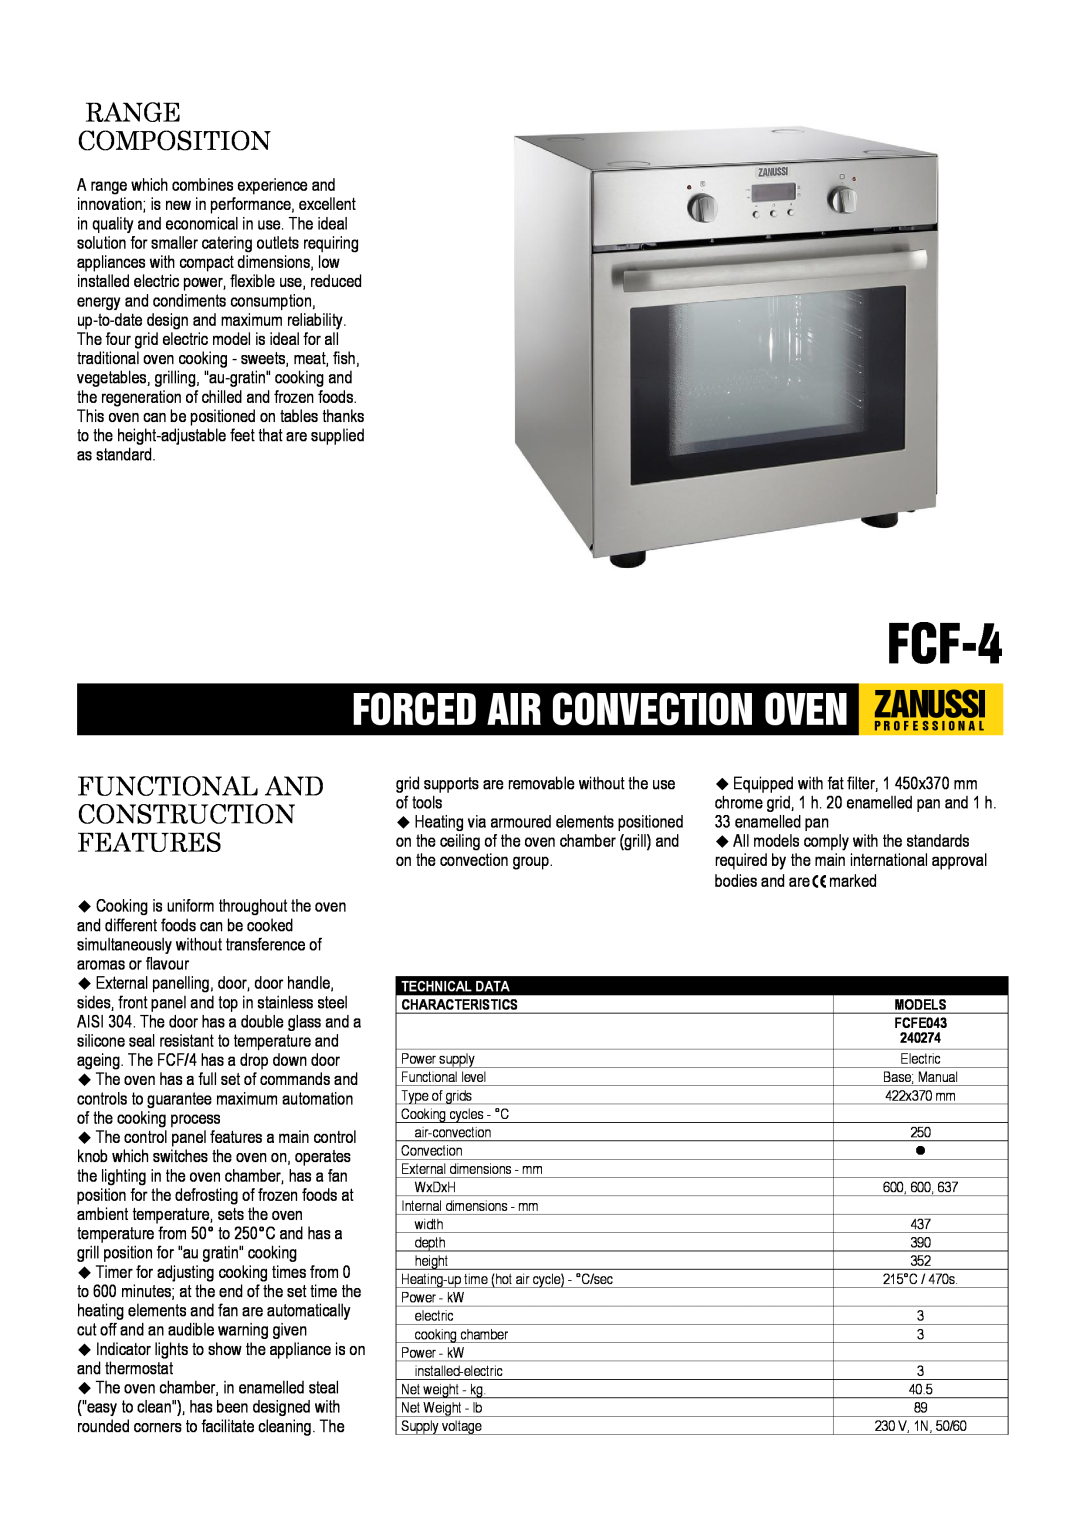 Electrolux FCF-4, FCFE043 dimensions Forced Air Convection Oven Zanussip R O F E S S I O N A L, Range Composition 